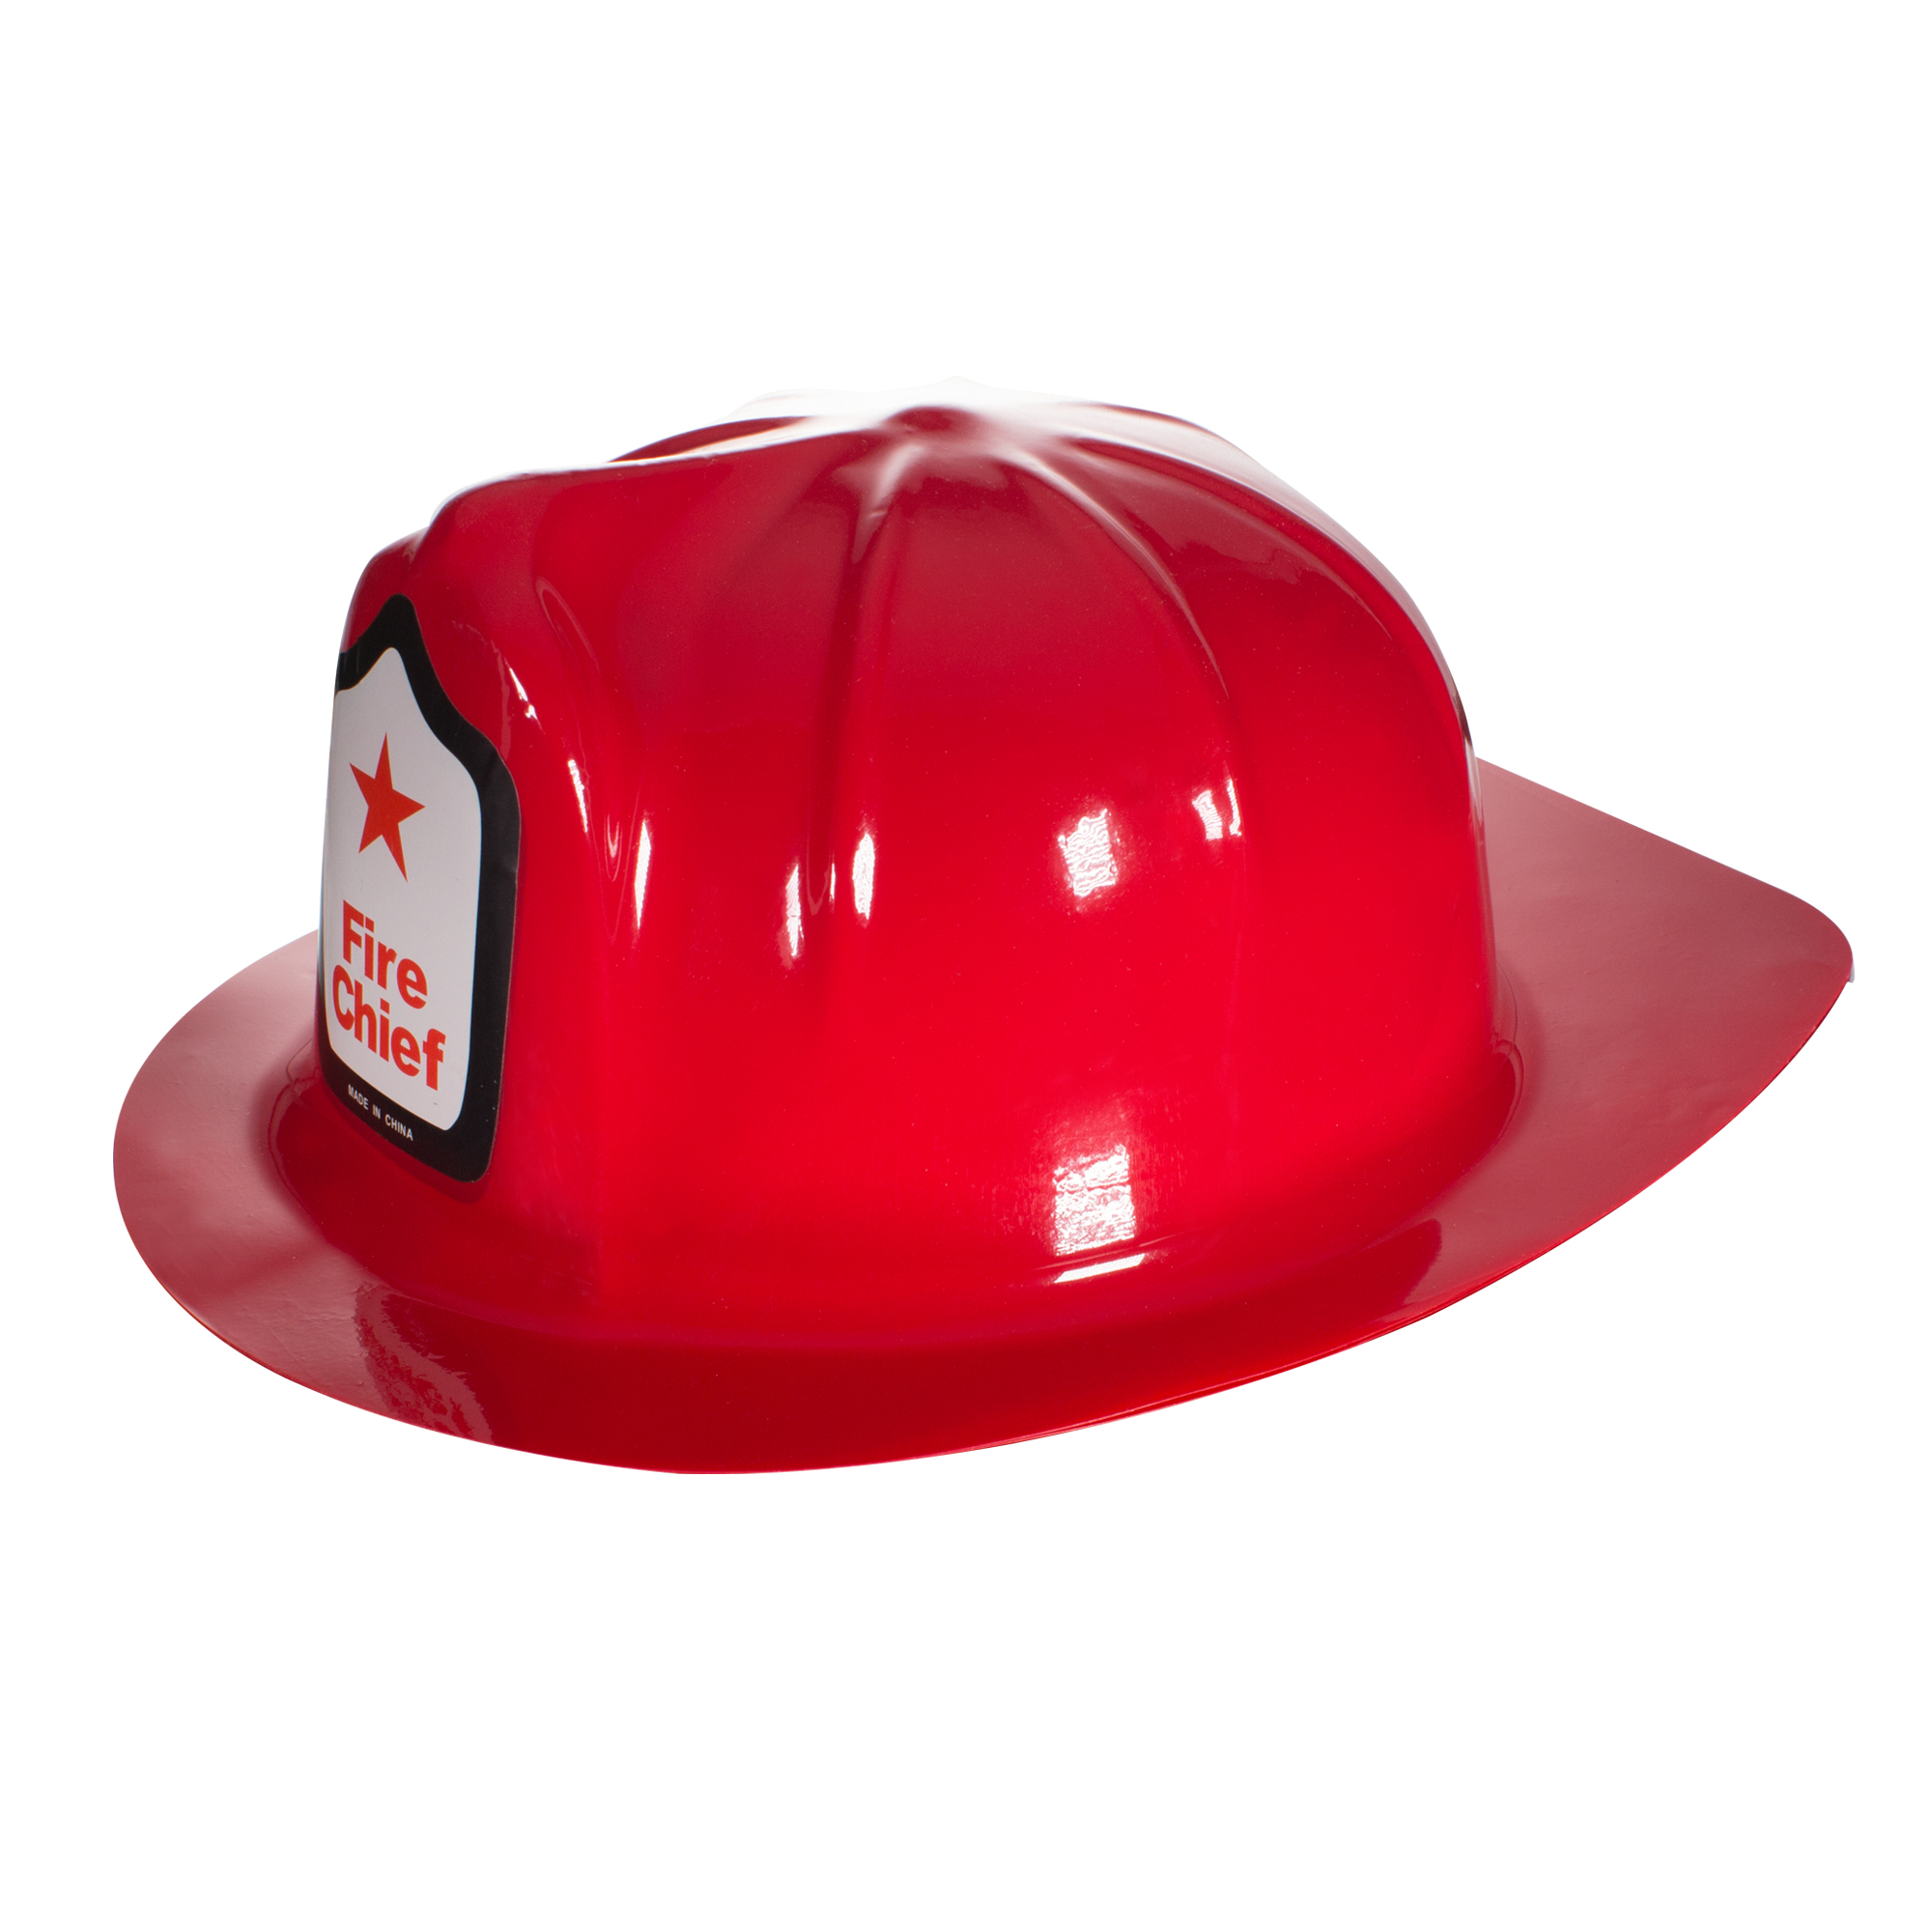 Red Firefighter Plastic Hats Kids Play Fireman Chief Party Favors LOT 